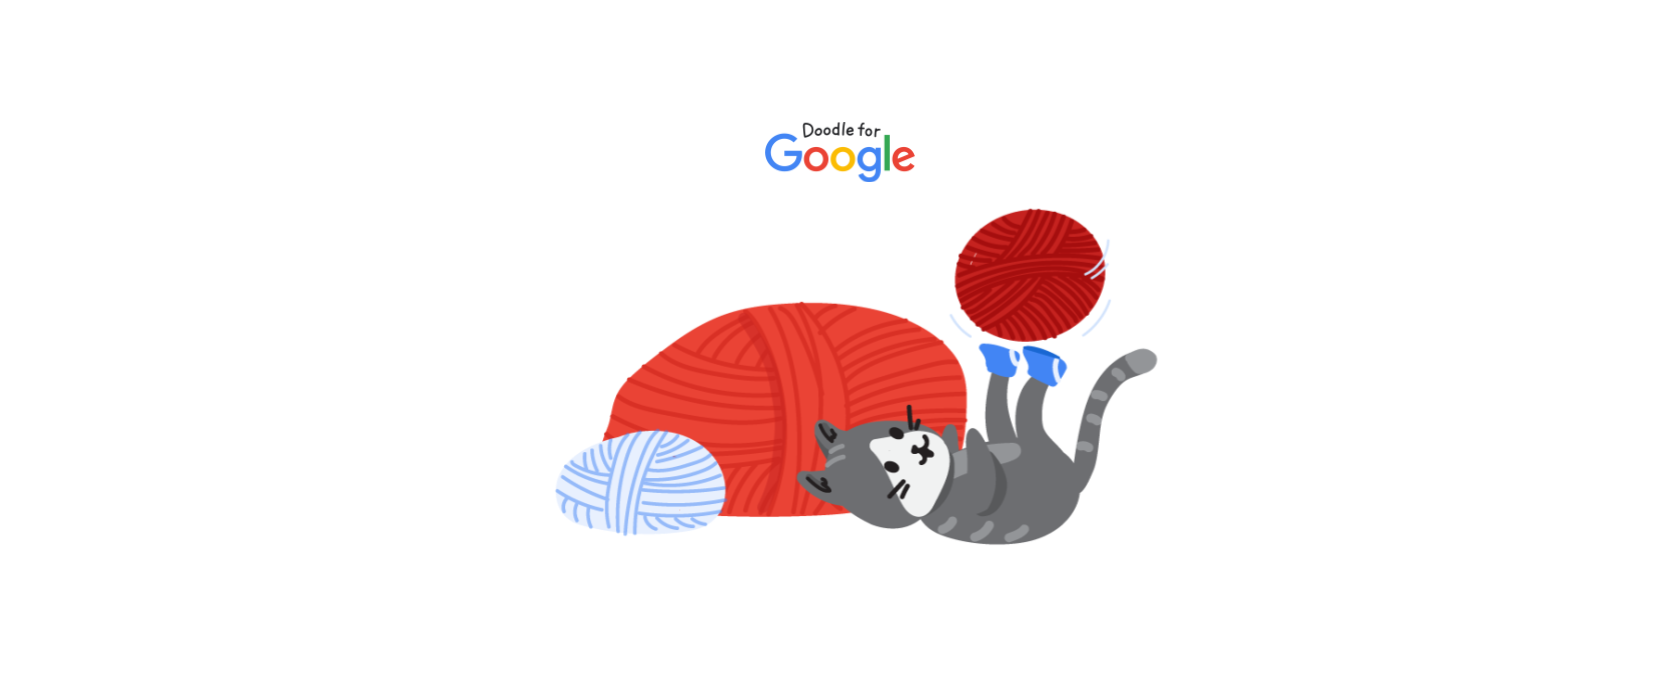 A kitten playing with a ball of yarn underneath the Doodle for Google logo.